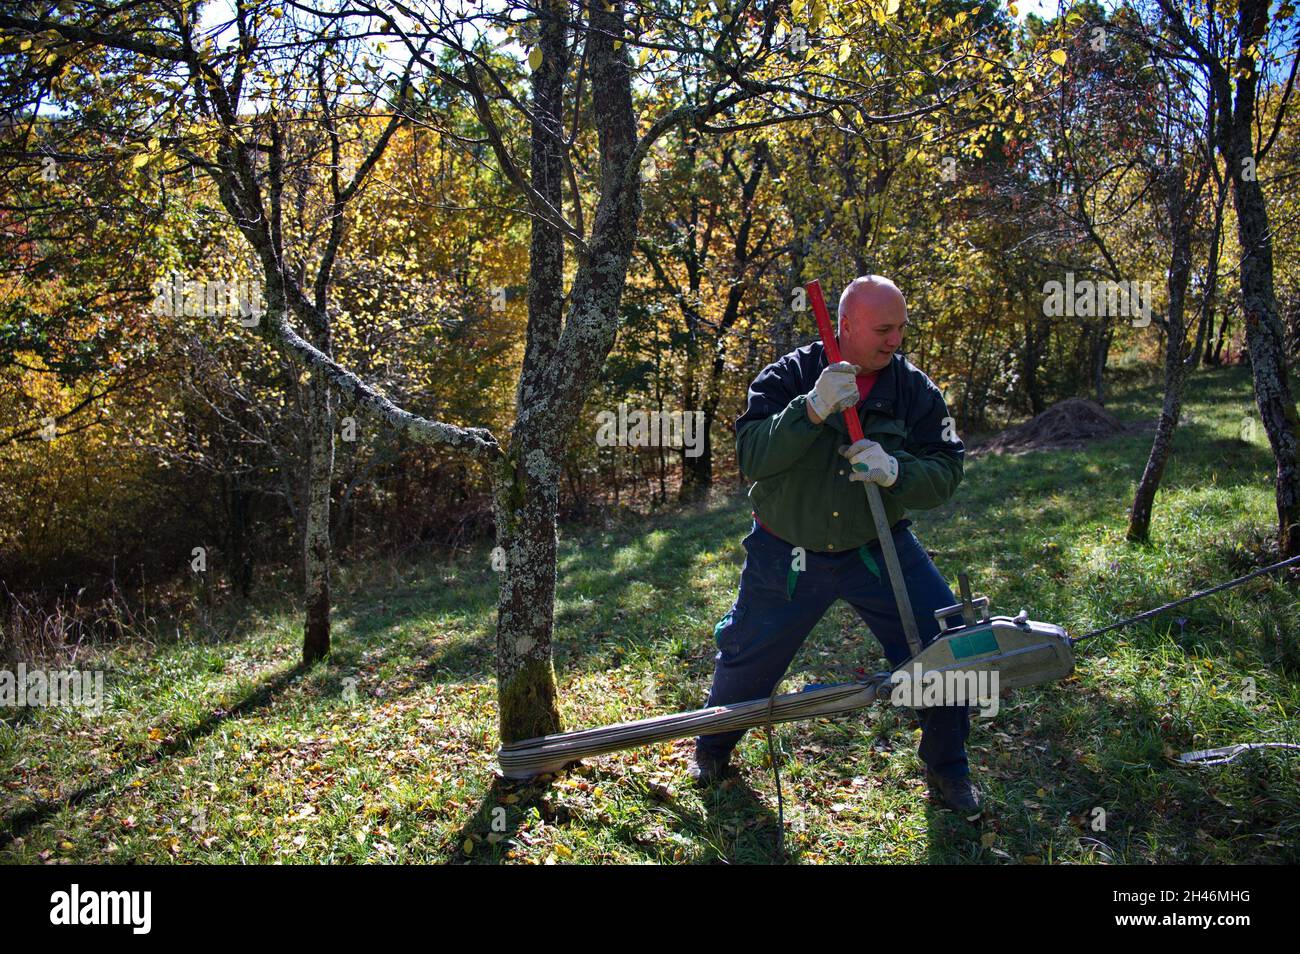 Man using equipment for pulling tree trunk while cutting tree Stock Photo